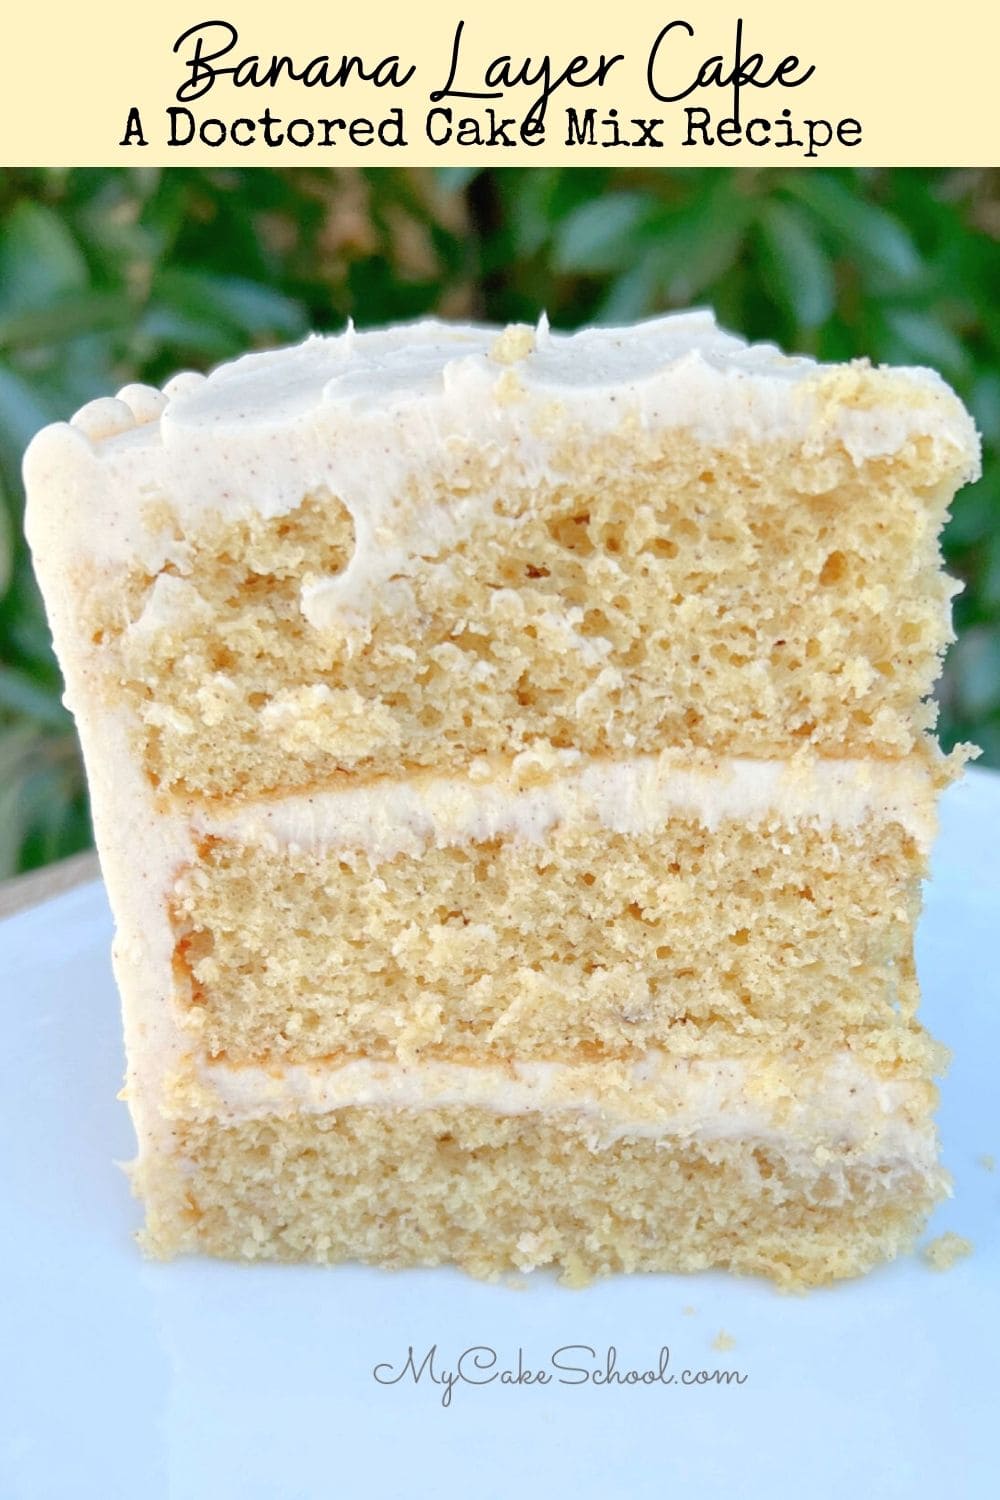 Banana Layer Cake- Doctored Cake Mix- So moist and delicious!